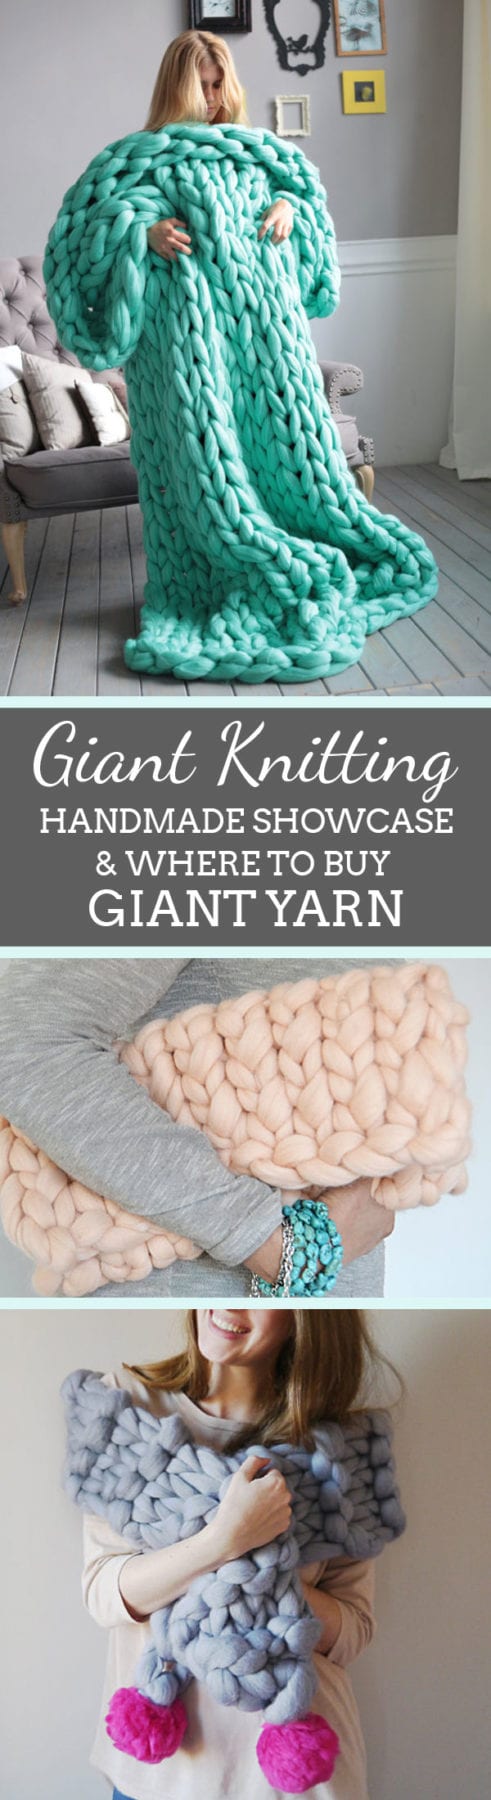 Giant Knitting on Etsy - arm knitted creations and where to buy giant yarn